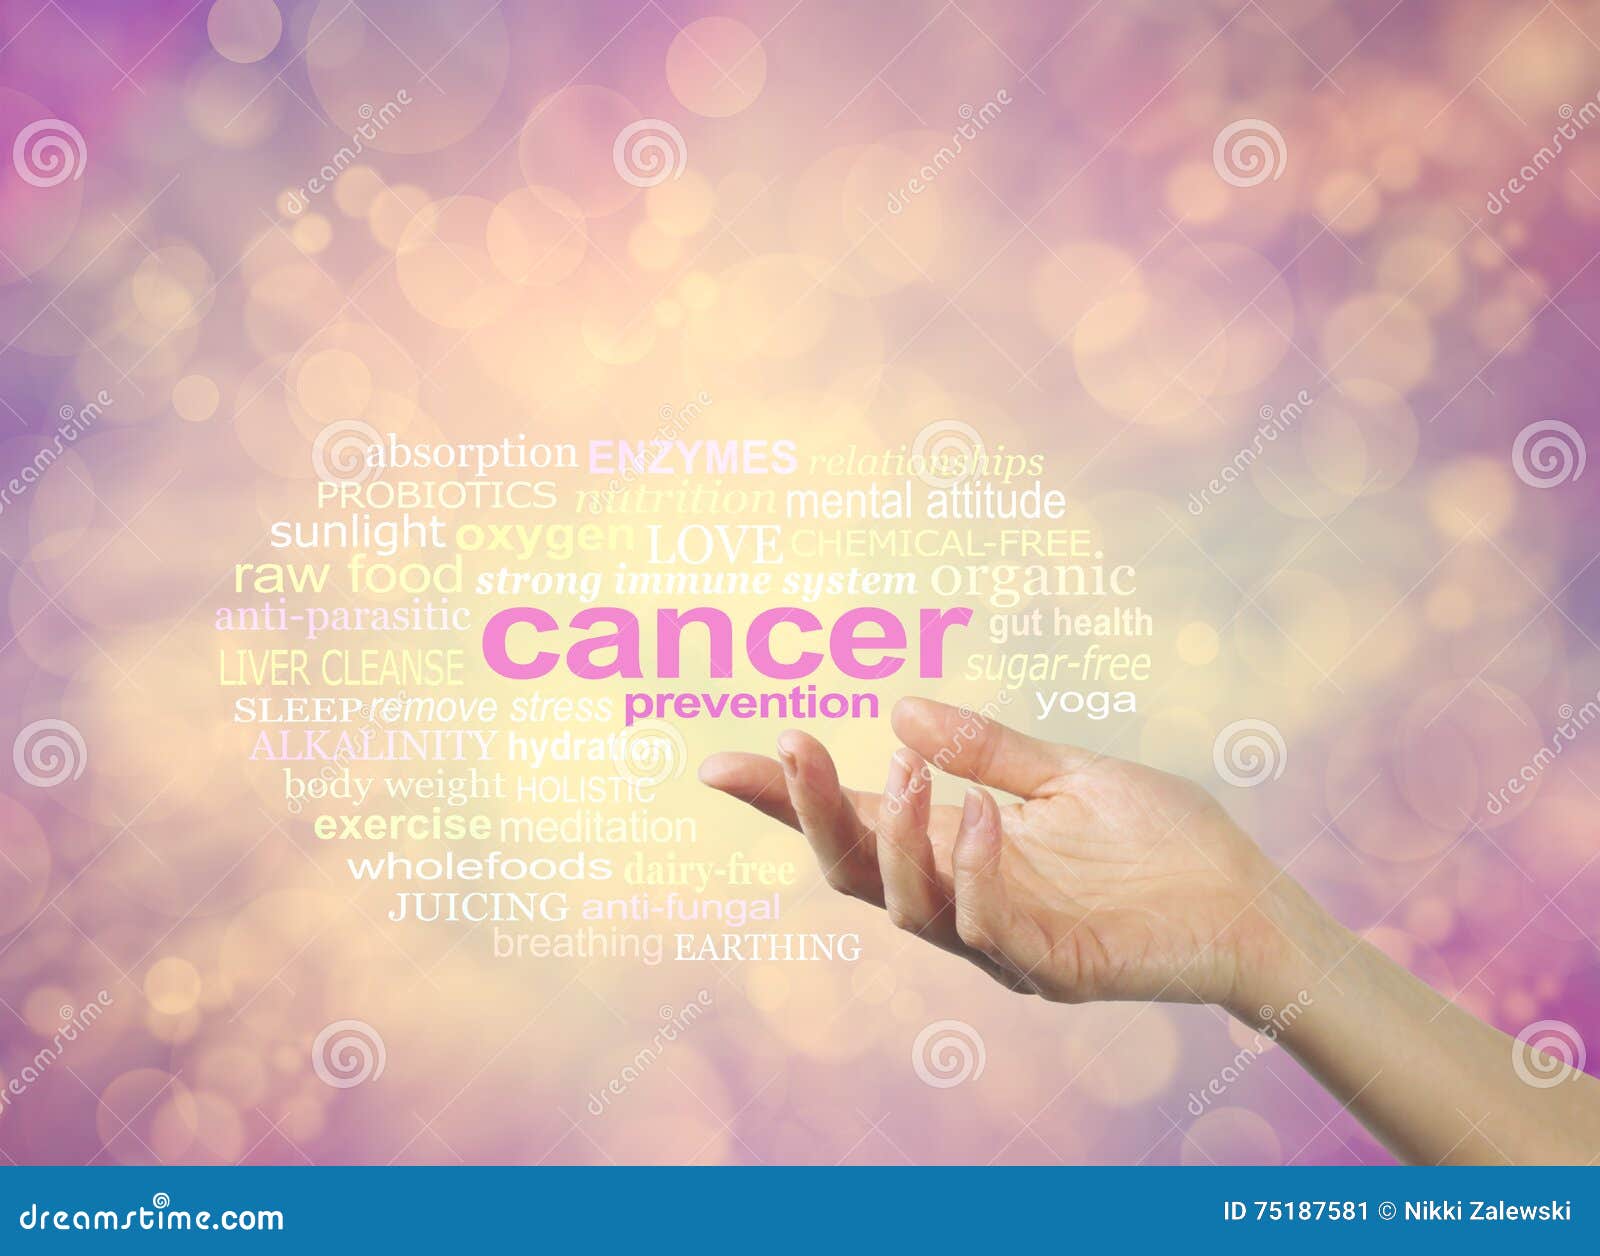 cancer prevention methods available to you